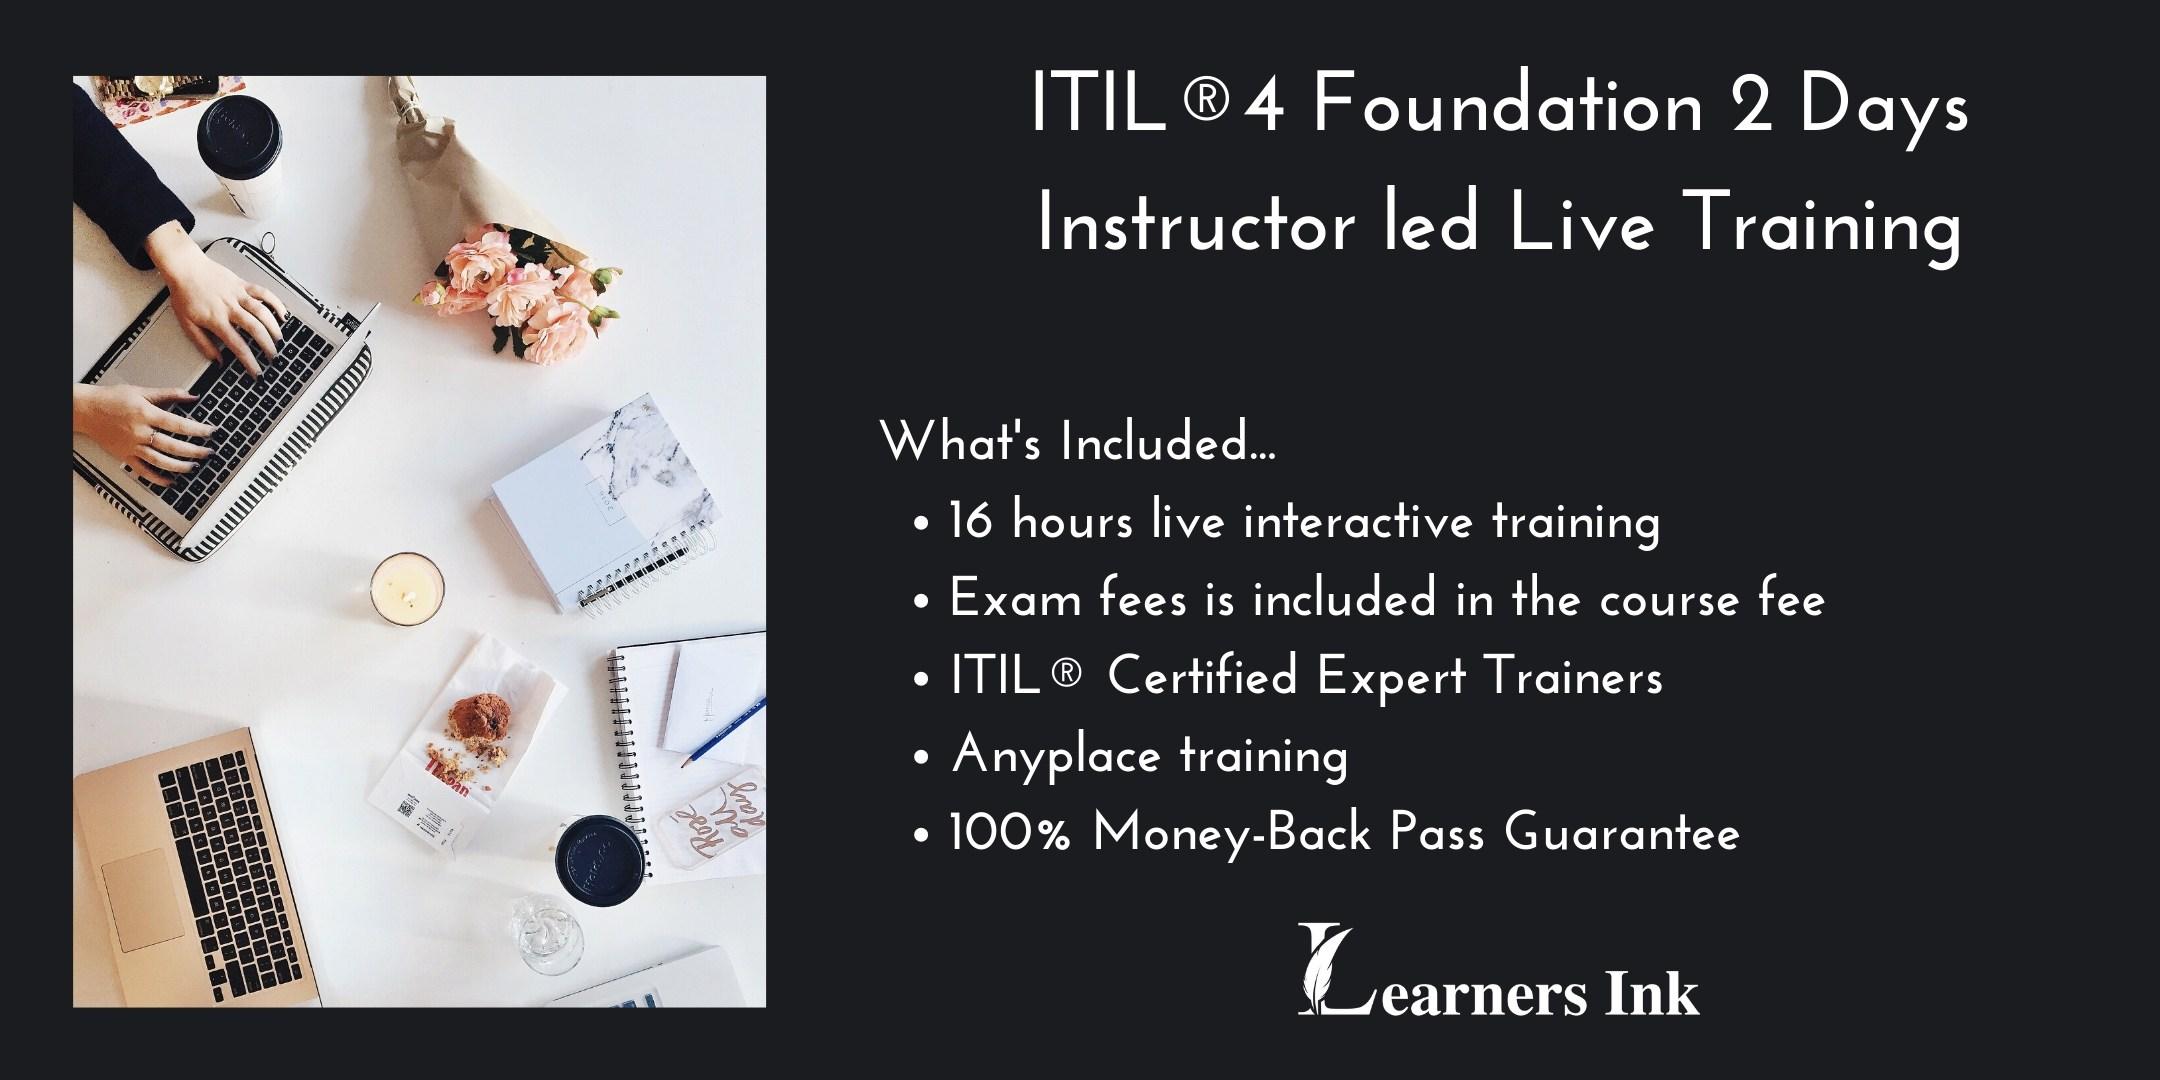 ITIL®4 Foundation 2 Days Certification Training in Waterbury